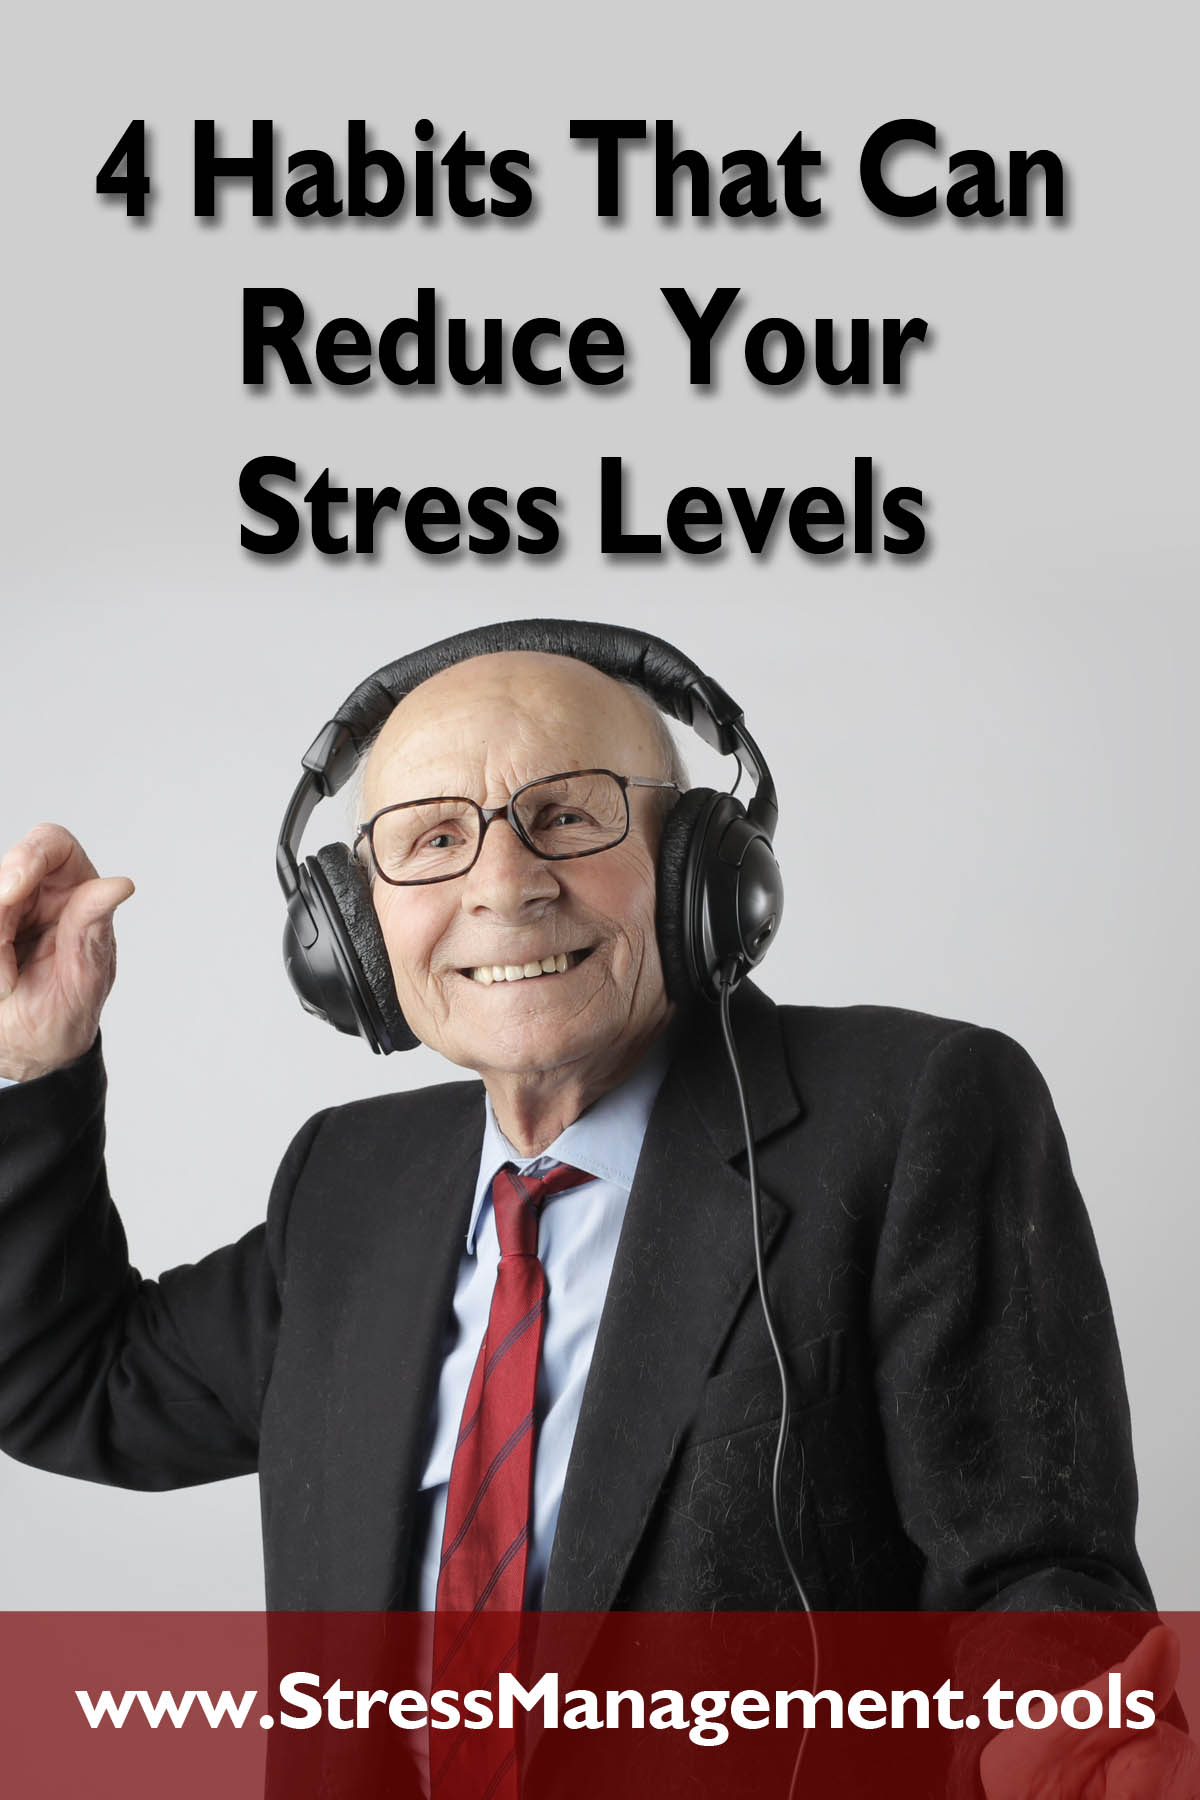 4 Habits That Can Reduce Your Stress Levels